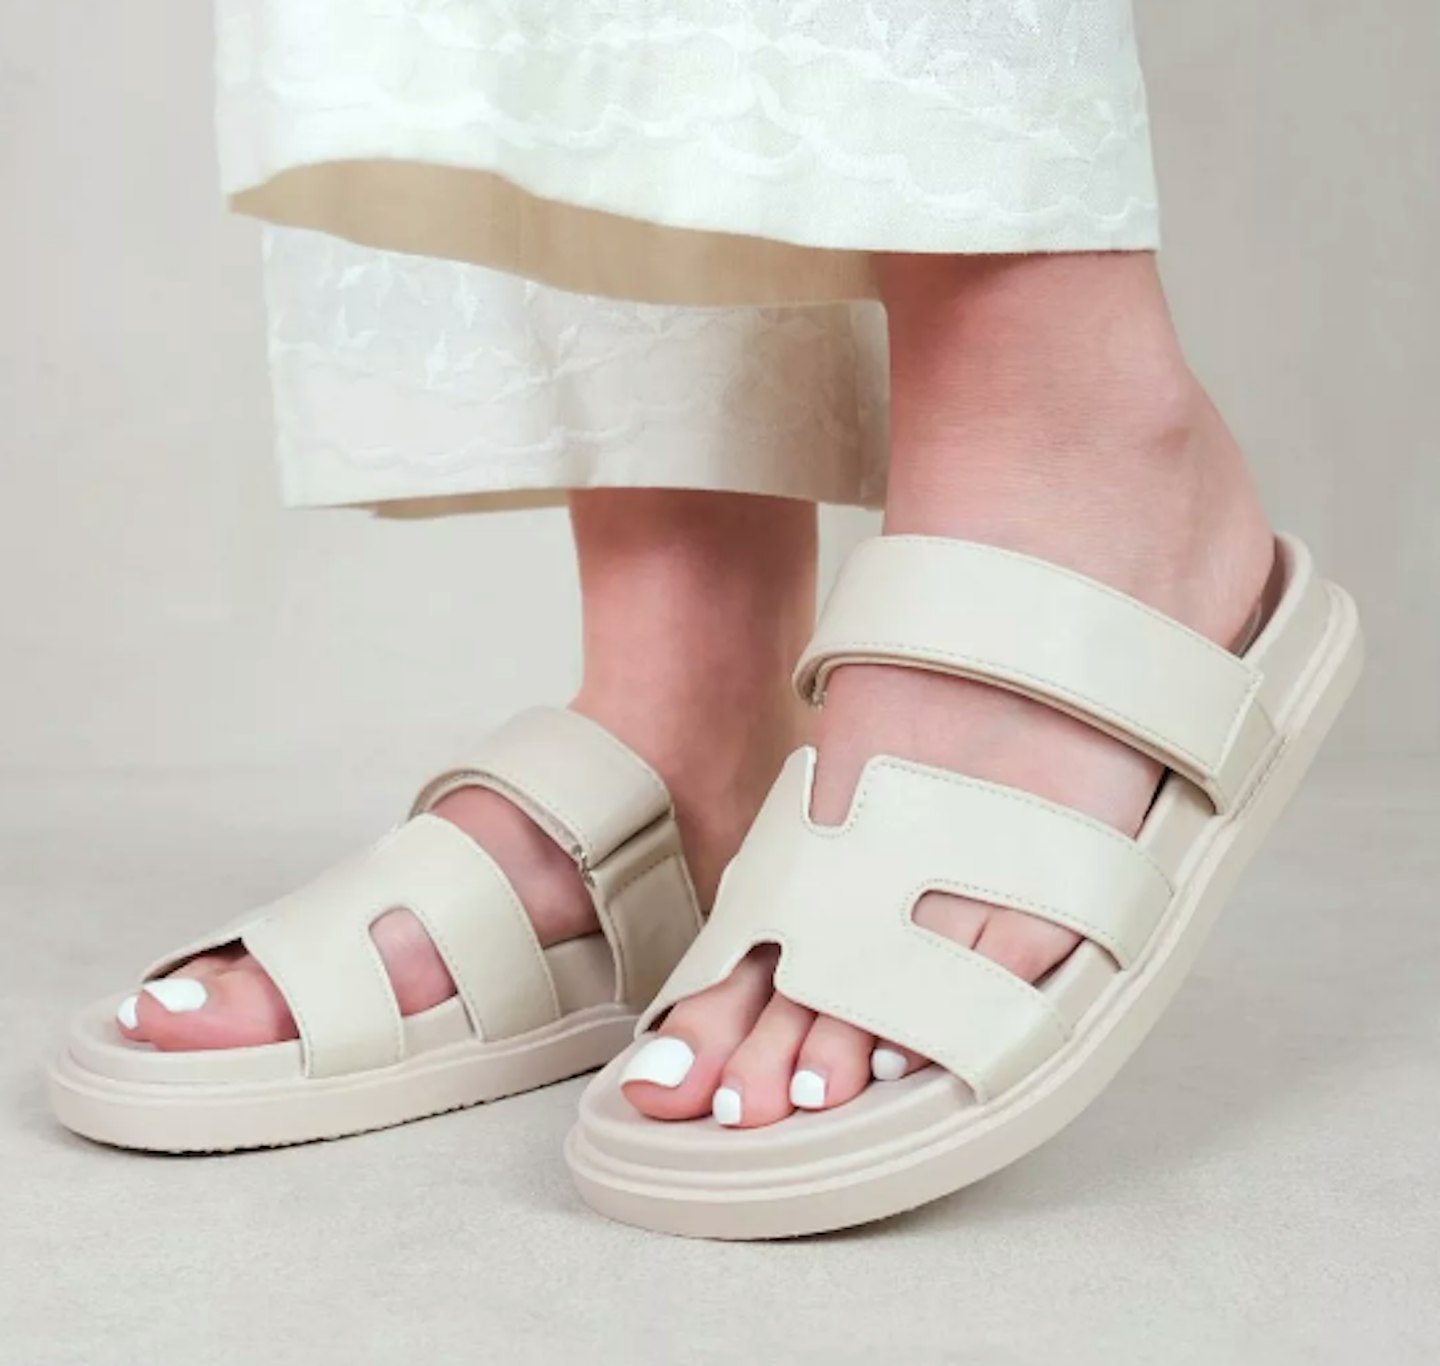 Where's That From Adagio Strappy Sandals